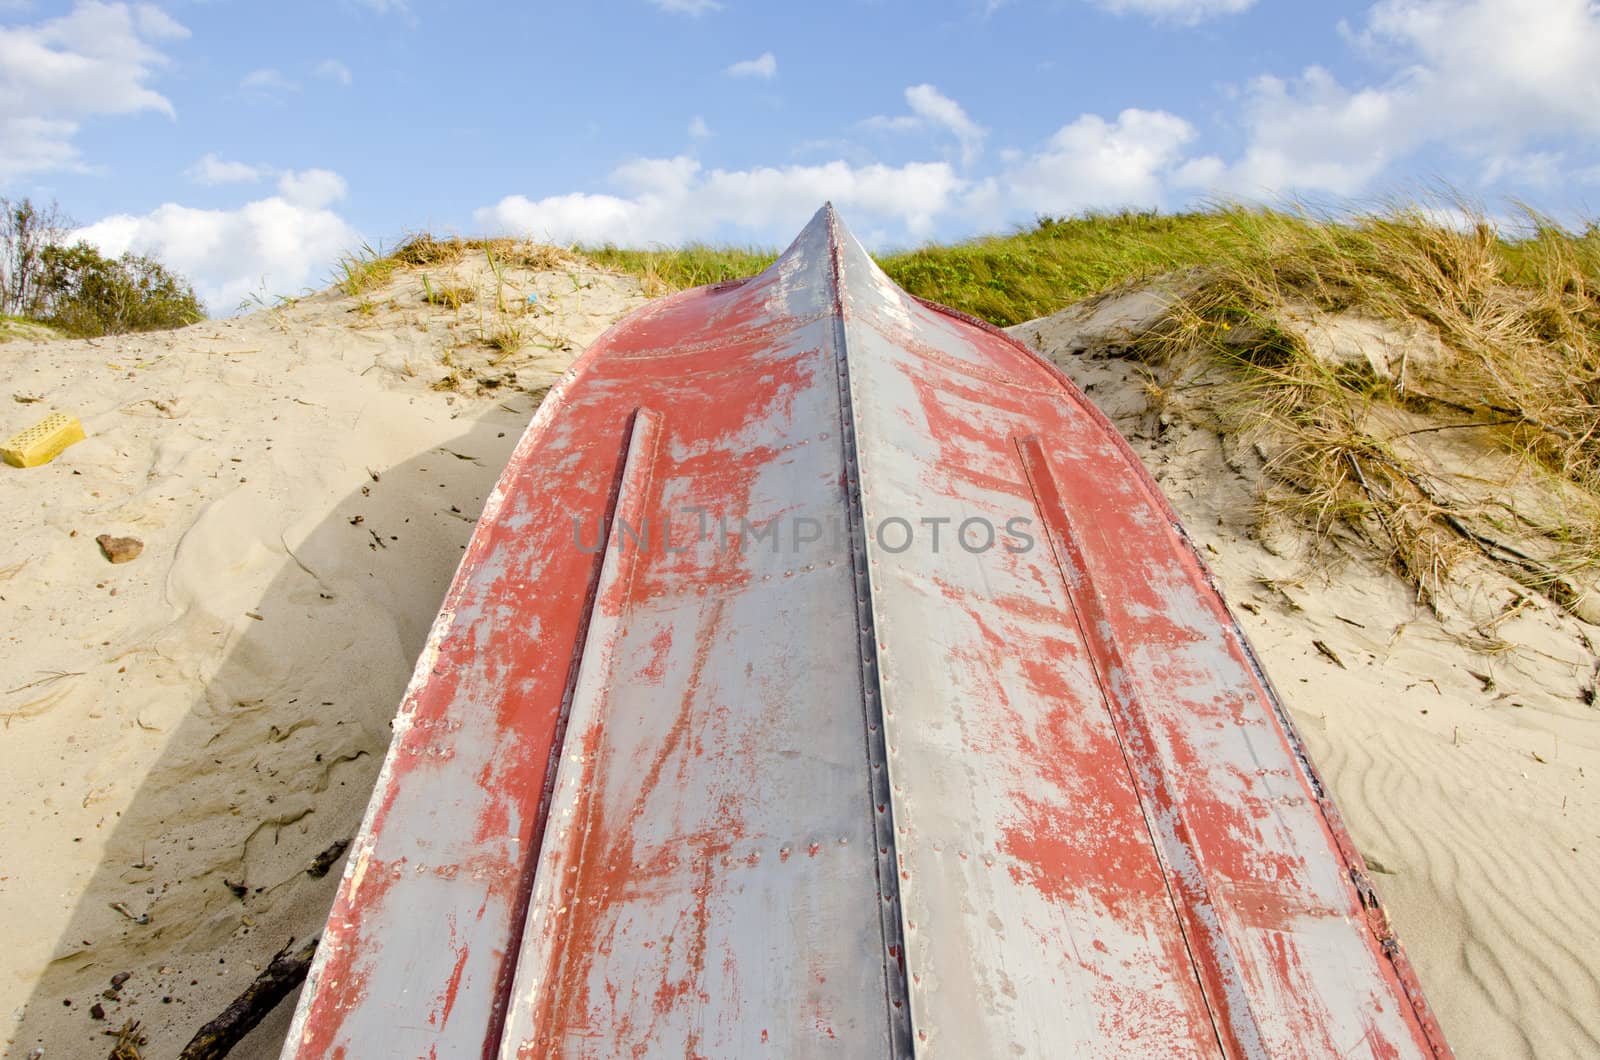 Boat made of tin upside down resting on the dunes. Water transportation.